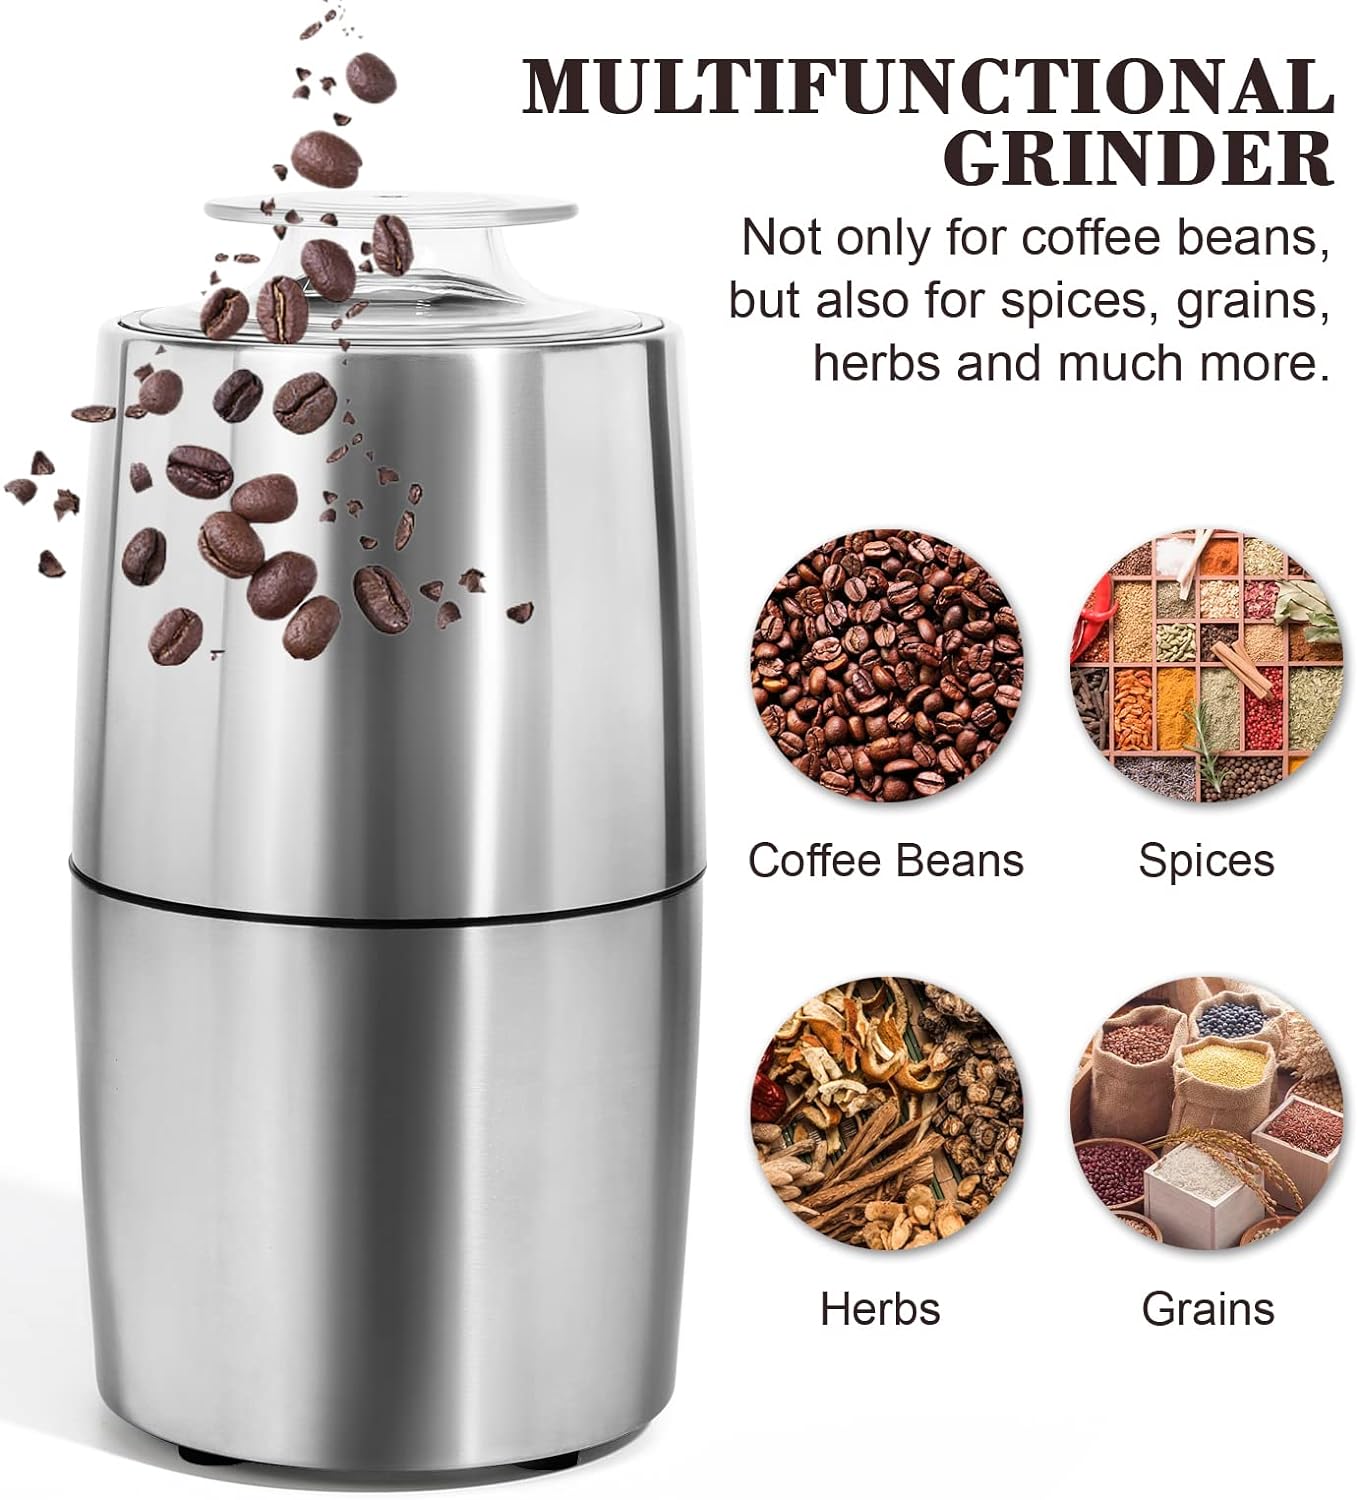 Coffee Grinder Electric - Turimon Stainless Steel Coffee Bean Grinder for Coffe Espresso Latte Mochas, One-Touch Grinder for Herb, Spice, Grain and More